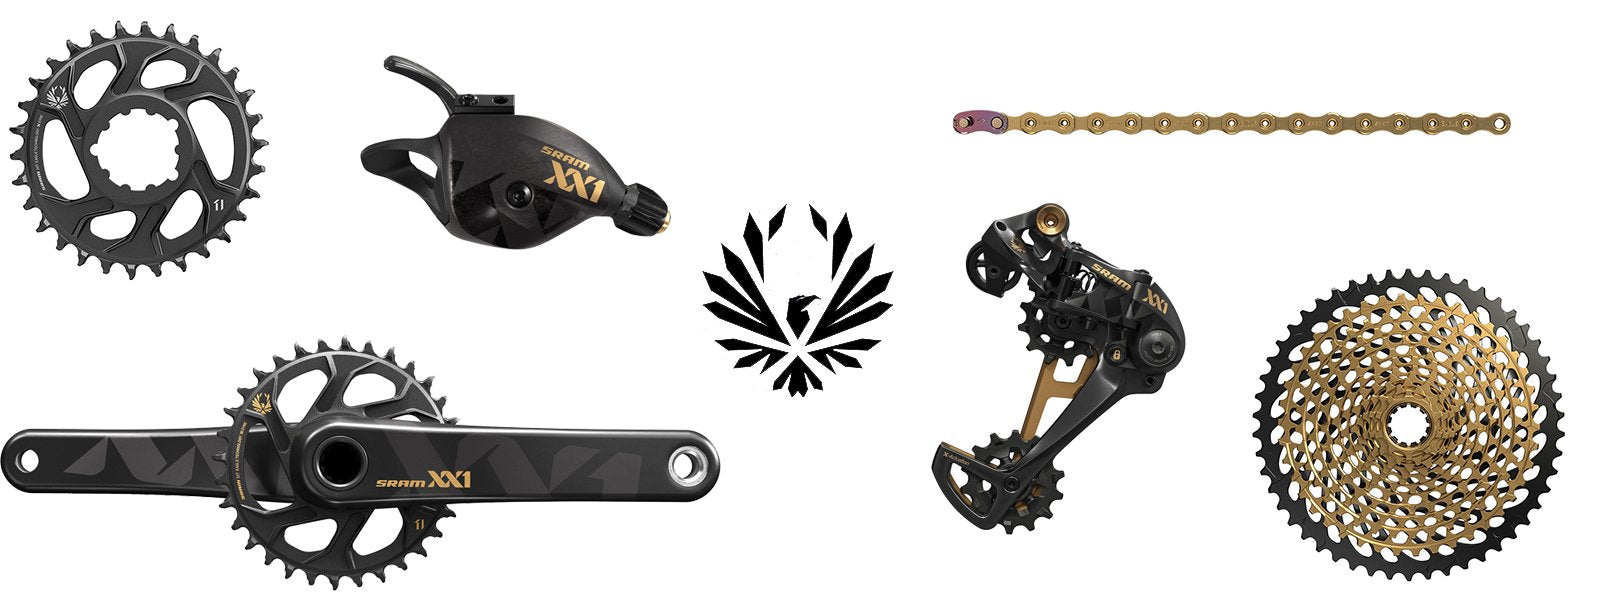 Will Sram Eagle Work On Your Bike?